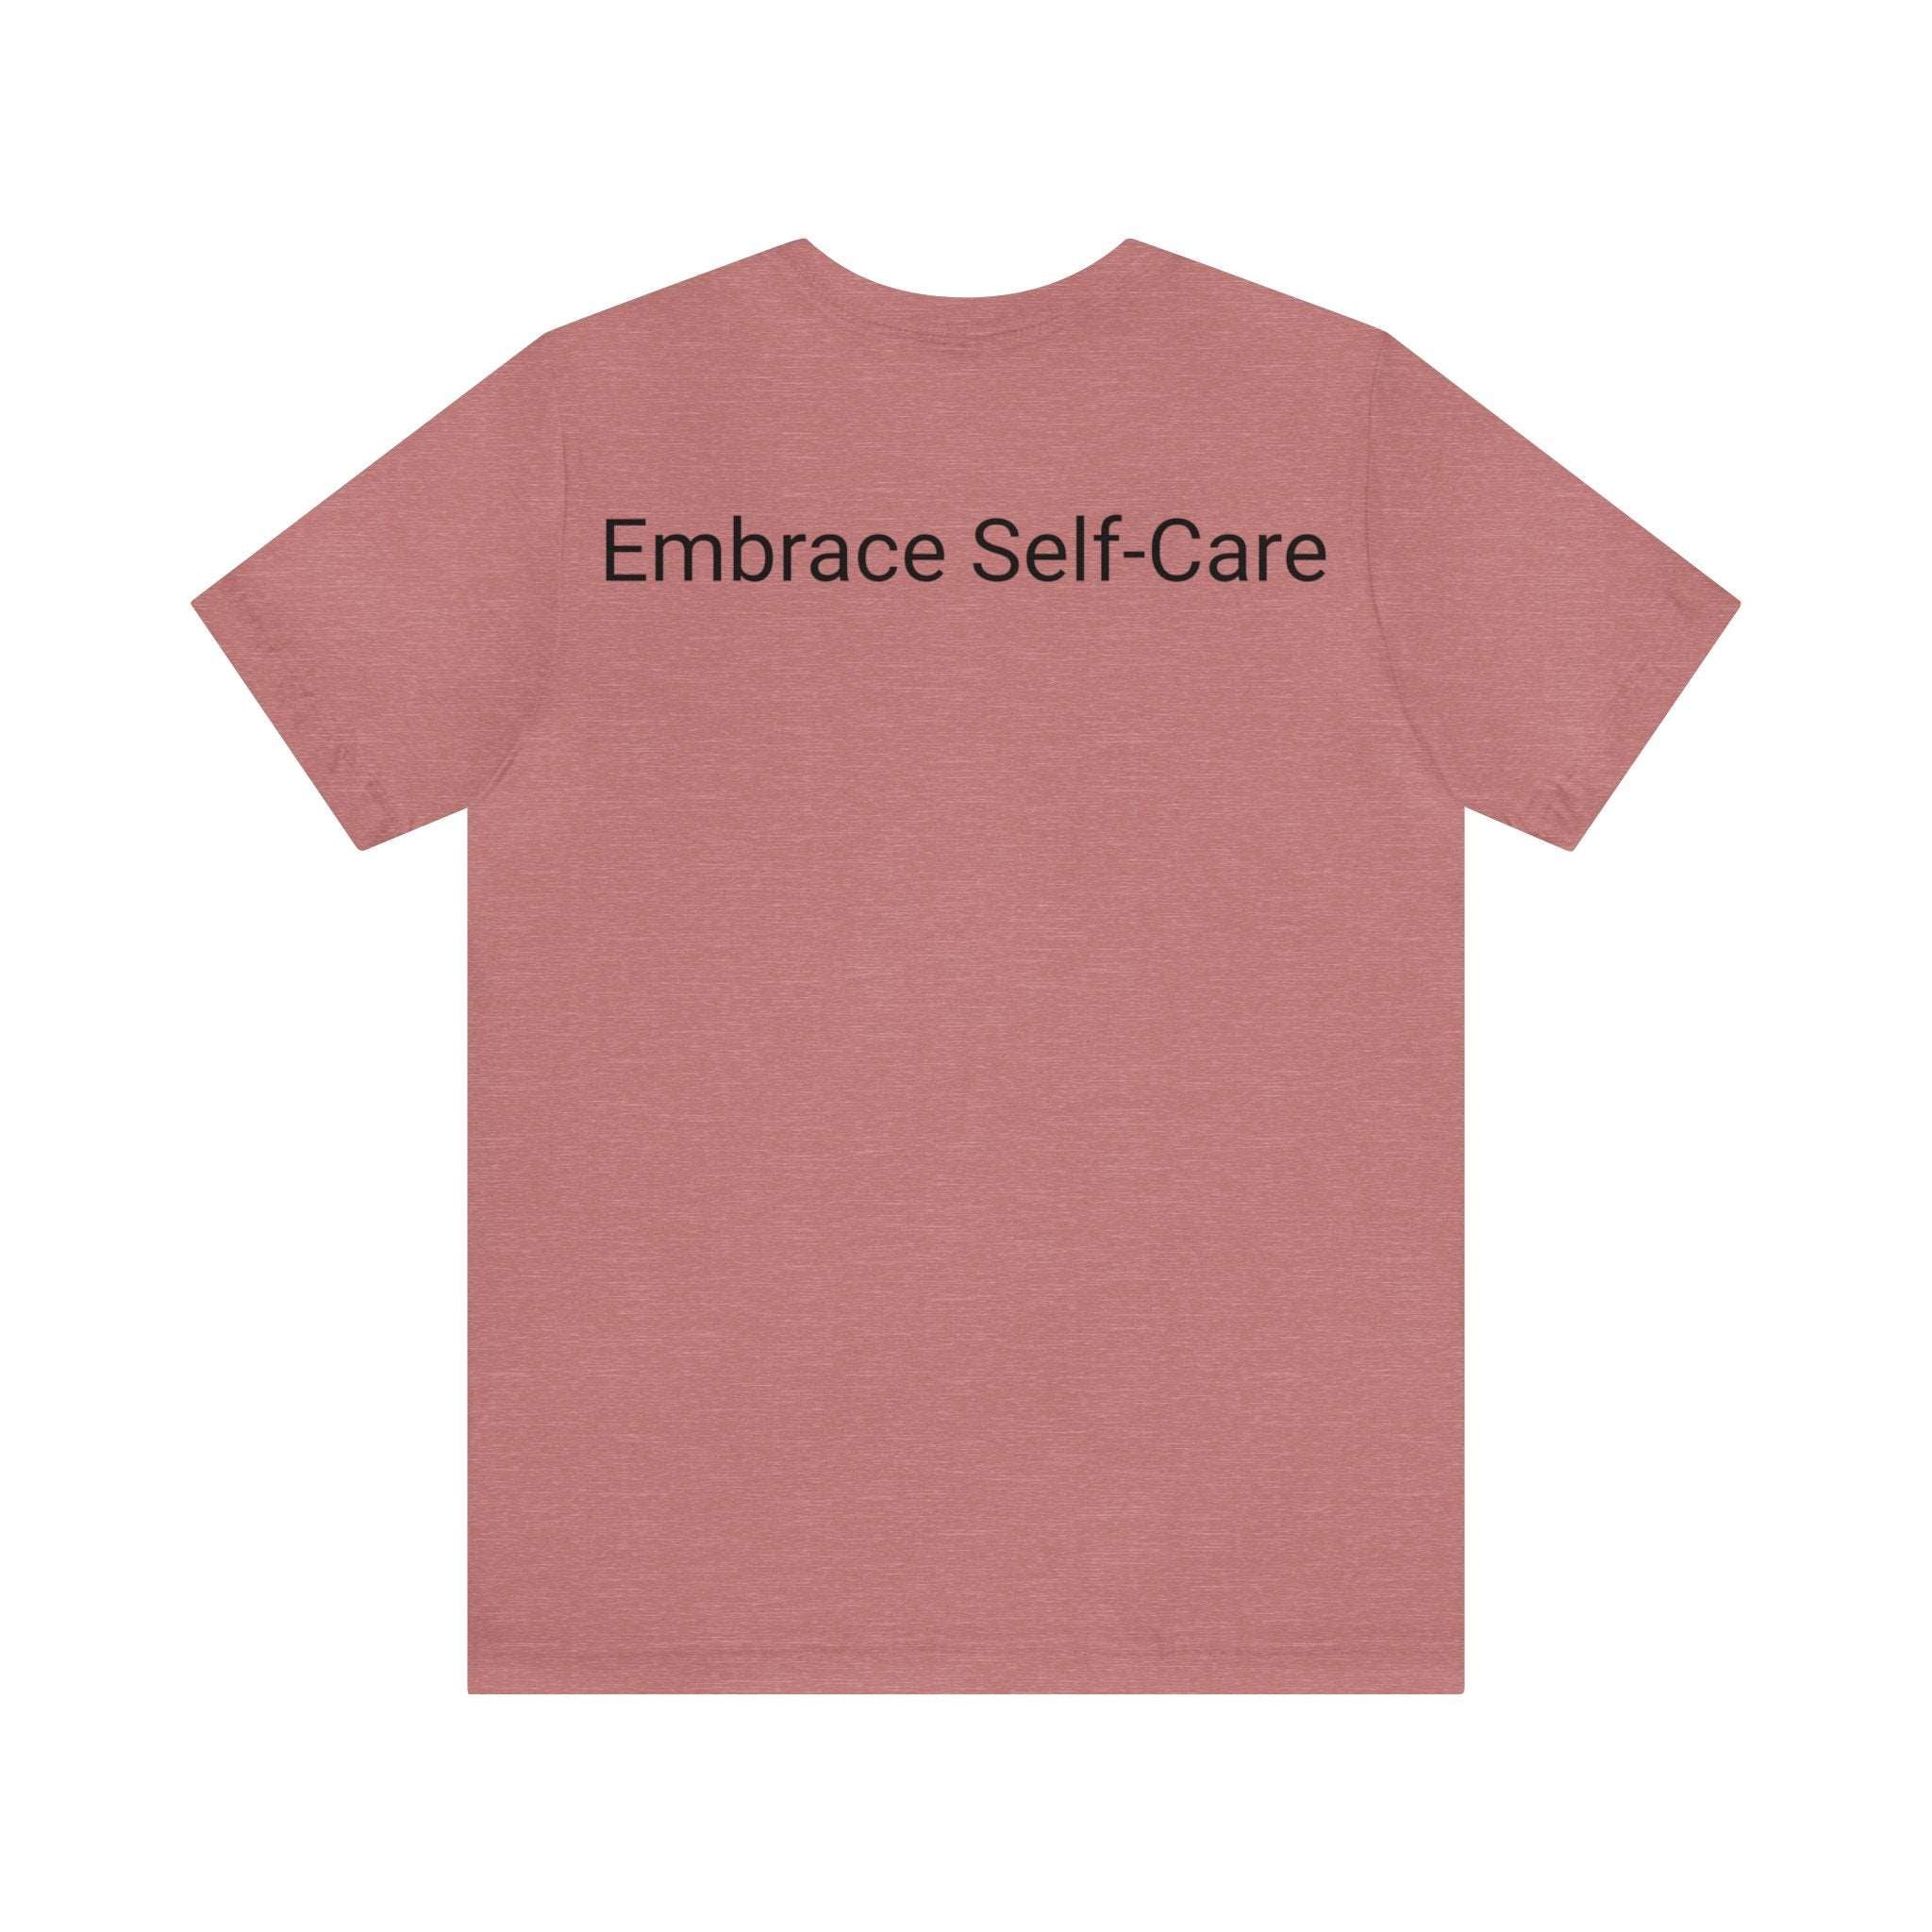 Embrace Self-Care Jersey Tee - Bella+Canvas 3001 Heather Mauve Airlume Cotton Bella+Canvas 3001 Crew Neckline Jersey Short Sleeve Lightweight Fabric Mental Health Support Retail Fit Tear-away Label Tee Unisex Tee T-Shirt 8477273034404751361_2048_c417a398-0171-4b46-9b45-31f17a738e37 Printify